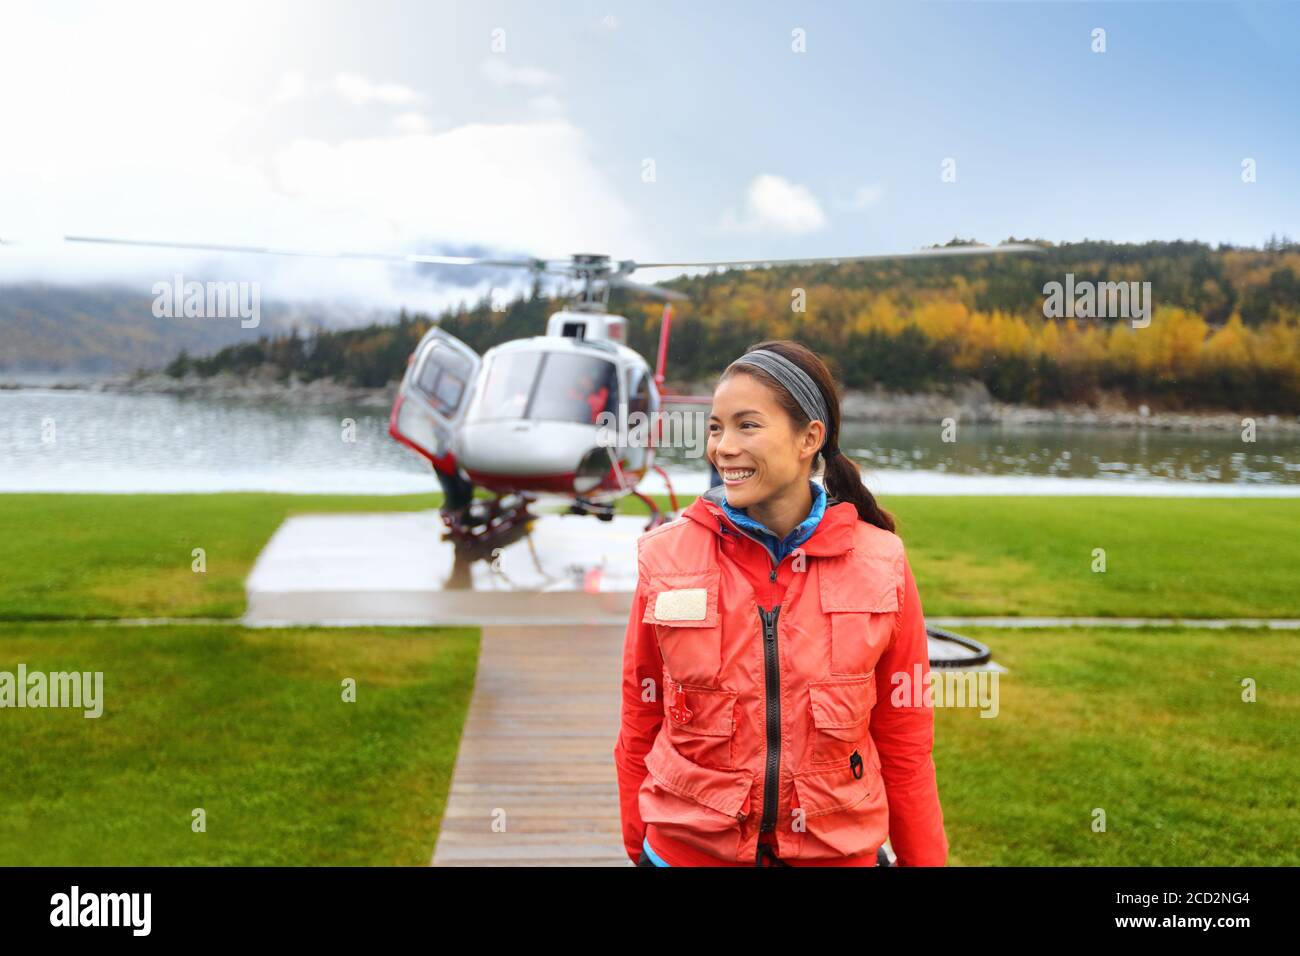 Happy helicopter tourist woman on Alaska tour excursion. Asian girl tourist cruise passenger on shore activity doing helicopter ride in Alaska, USA. Stock Photo